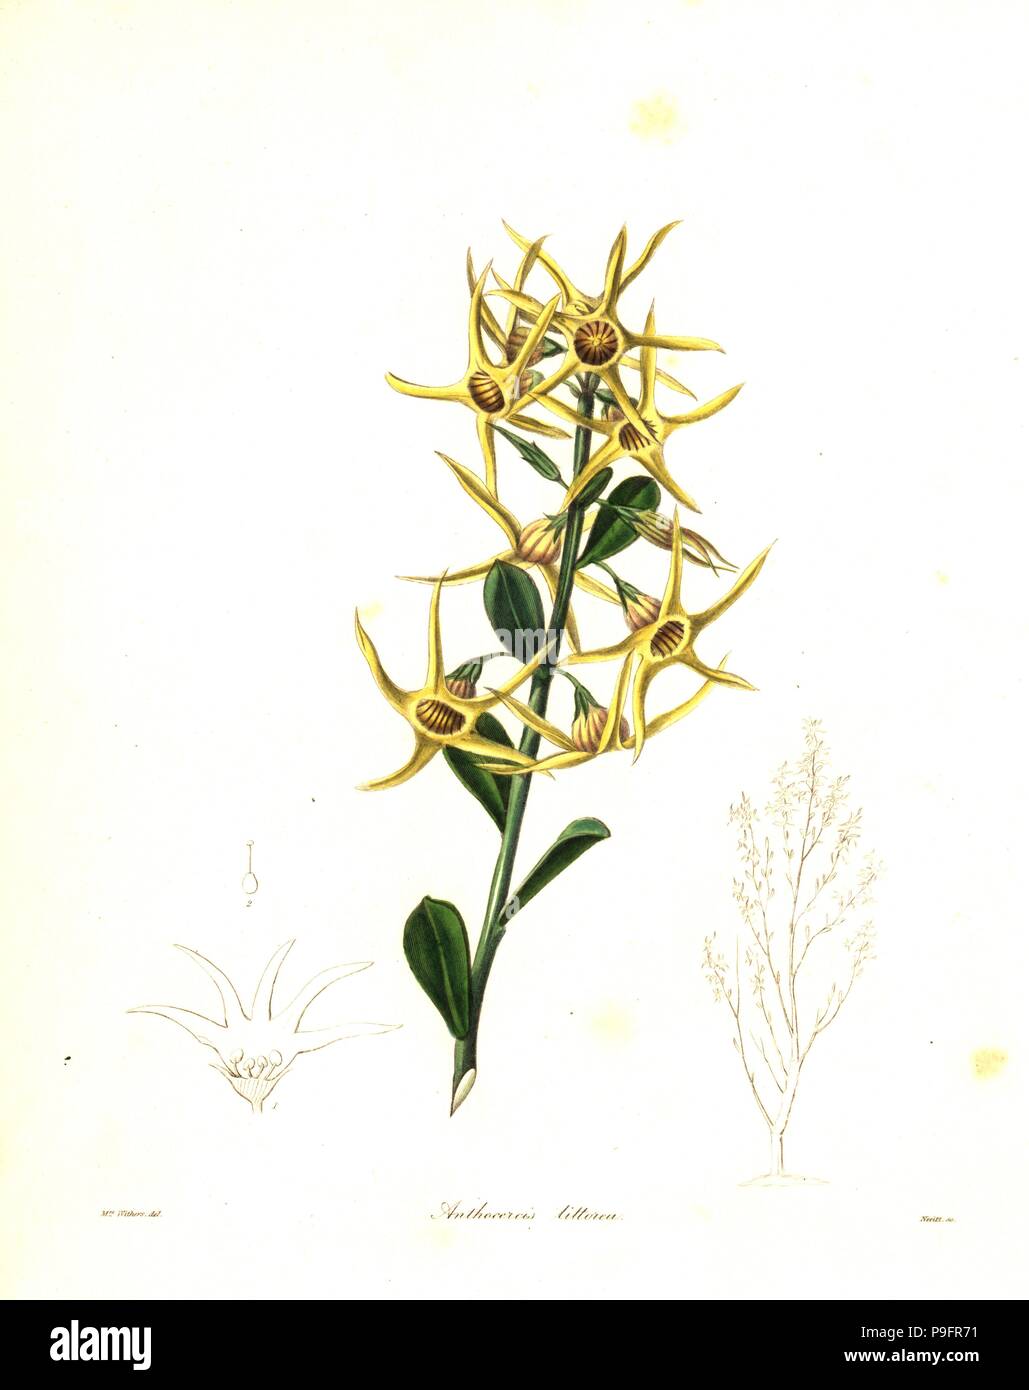 Yellow tailflower or sea-coast anthocercis, Anthocercis littorea. Handcoloured copperplate engraving by S. Nevitt after a botanical illustration by Mrs Augusta Withers from Benjamin Maund and the Rev. John Stevens Henslow's The Botanist, London, 1836. Stock Photo